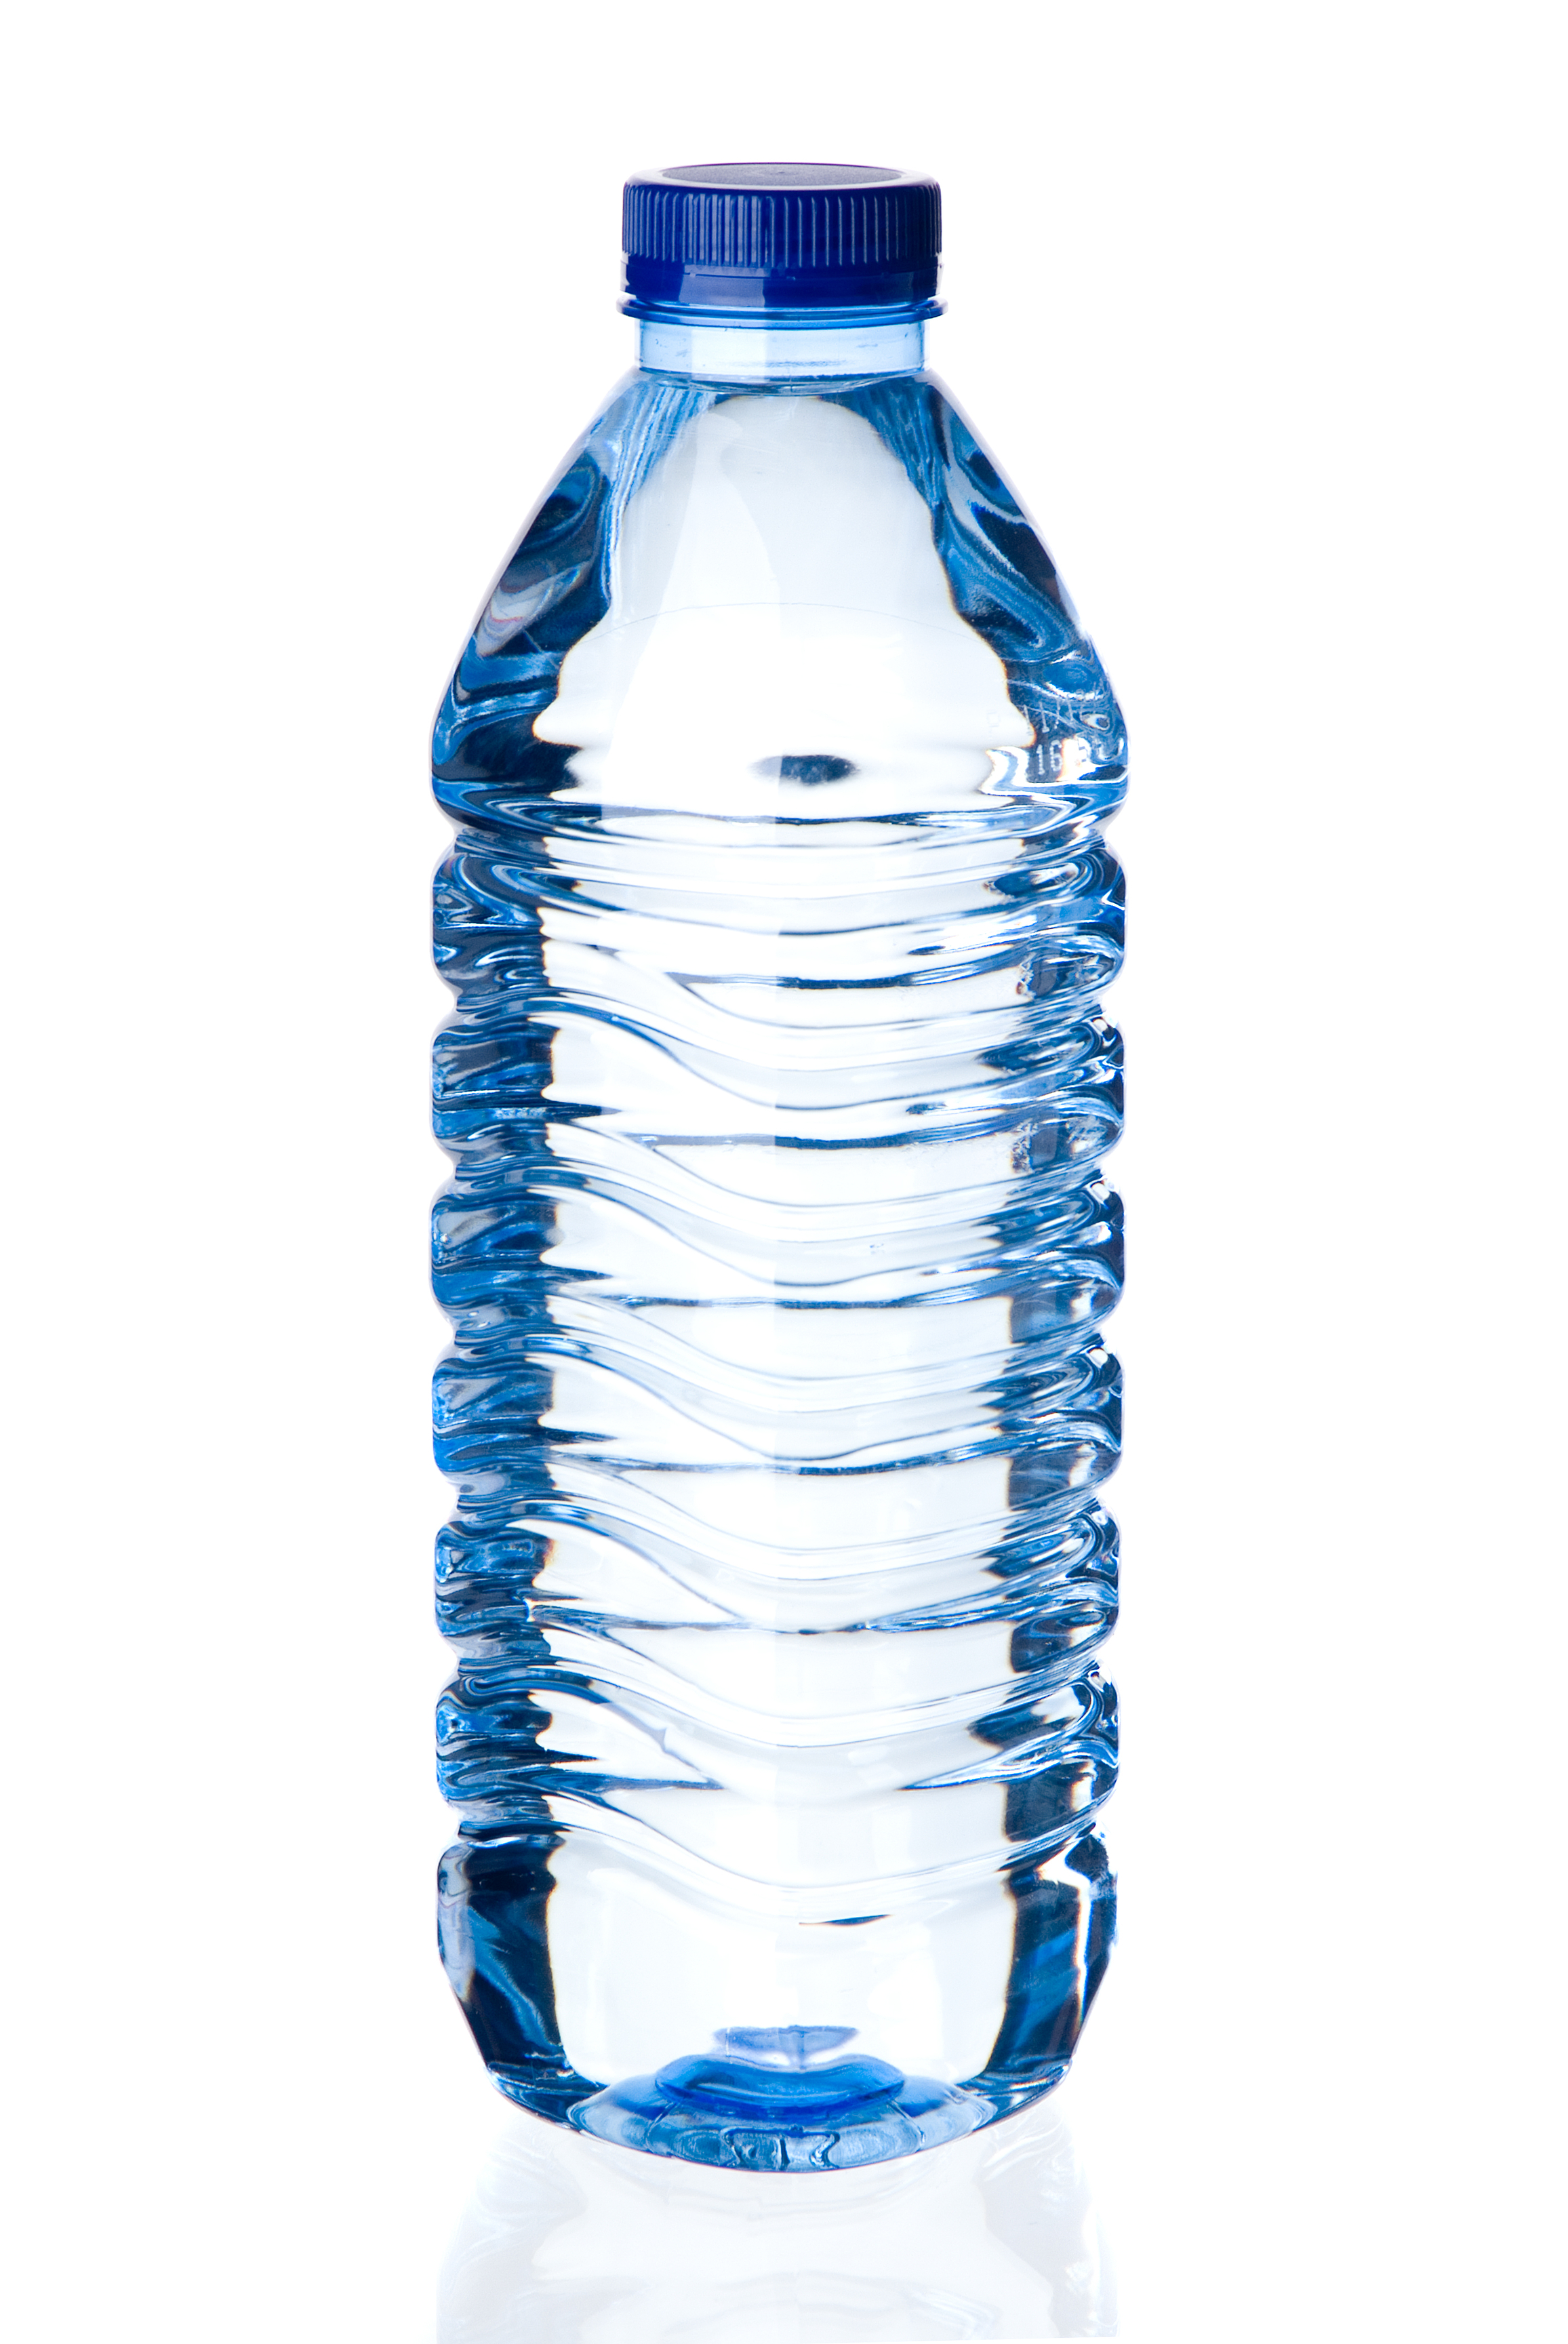 Free Bottled Water Cliparts, Download Free Clip Art, Free.